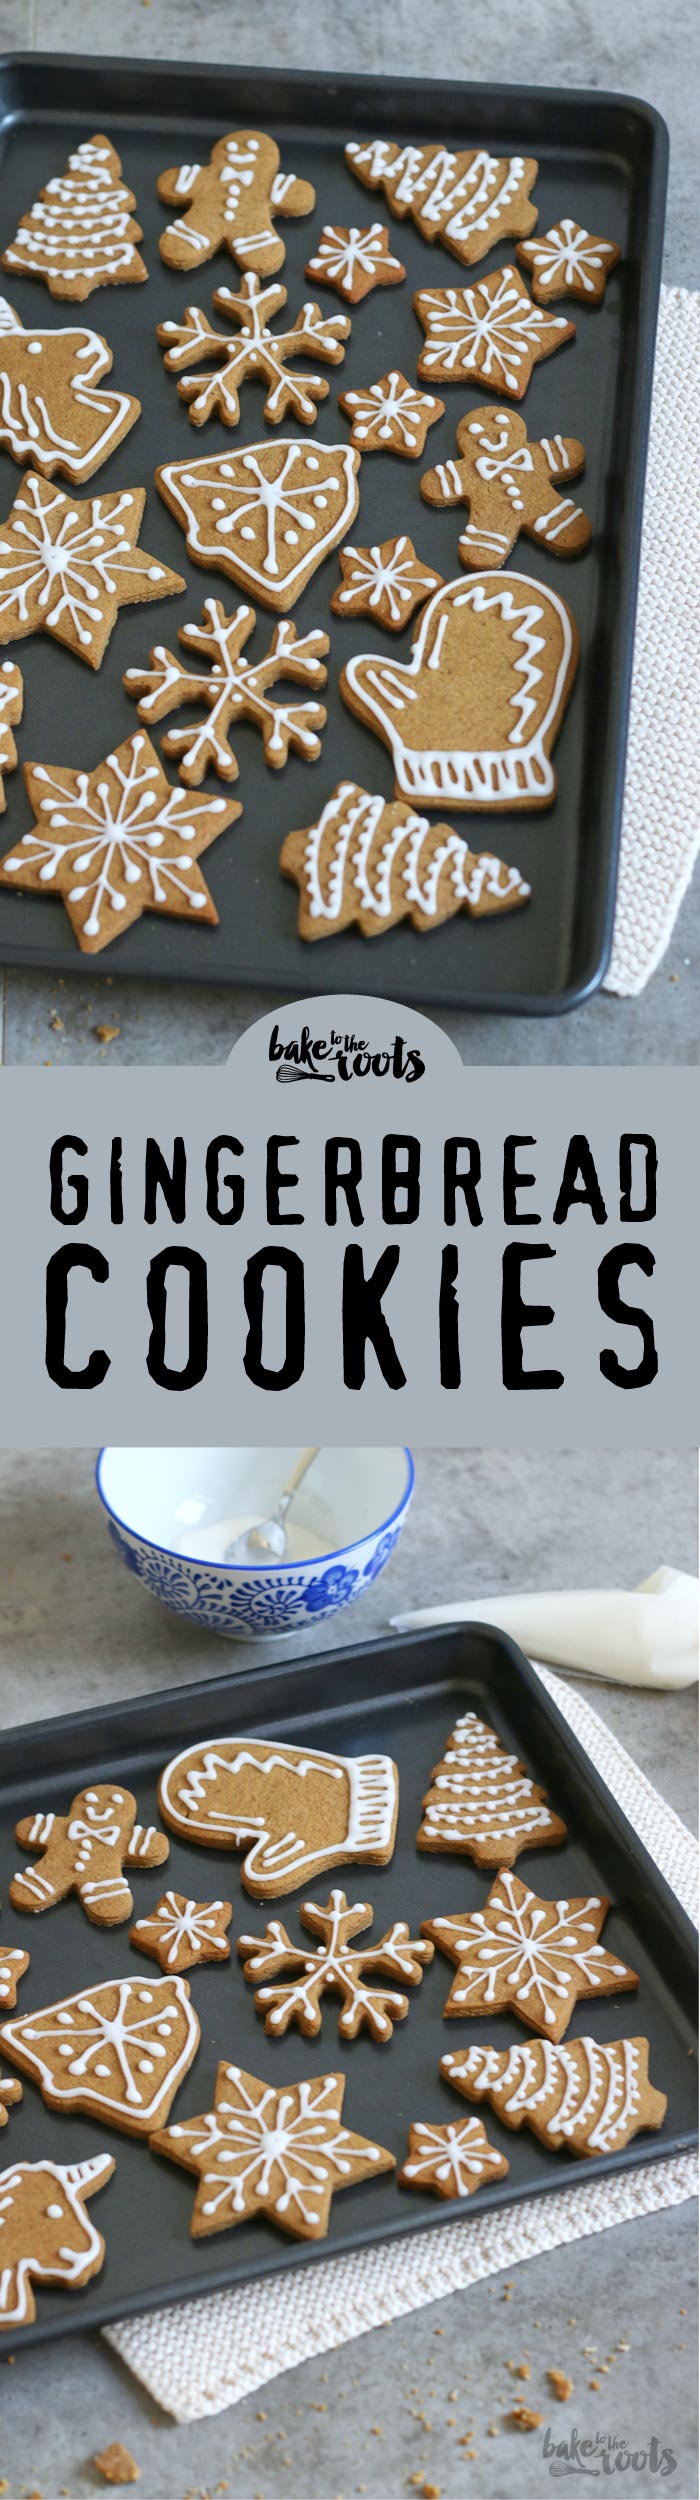 Cute and delicious Gingerbread Christmas cookies. Easy dough and icing. All you need for some nice cookies! | Bake to the roots